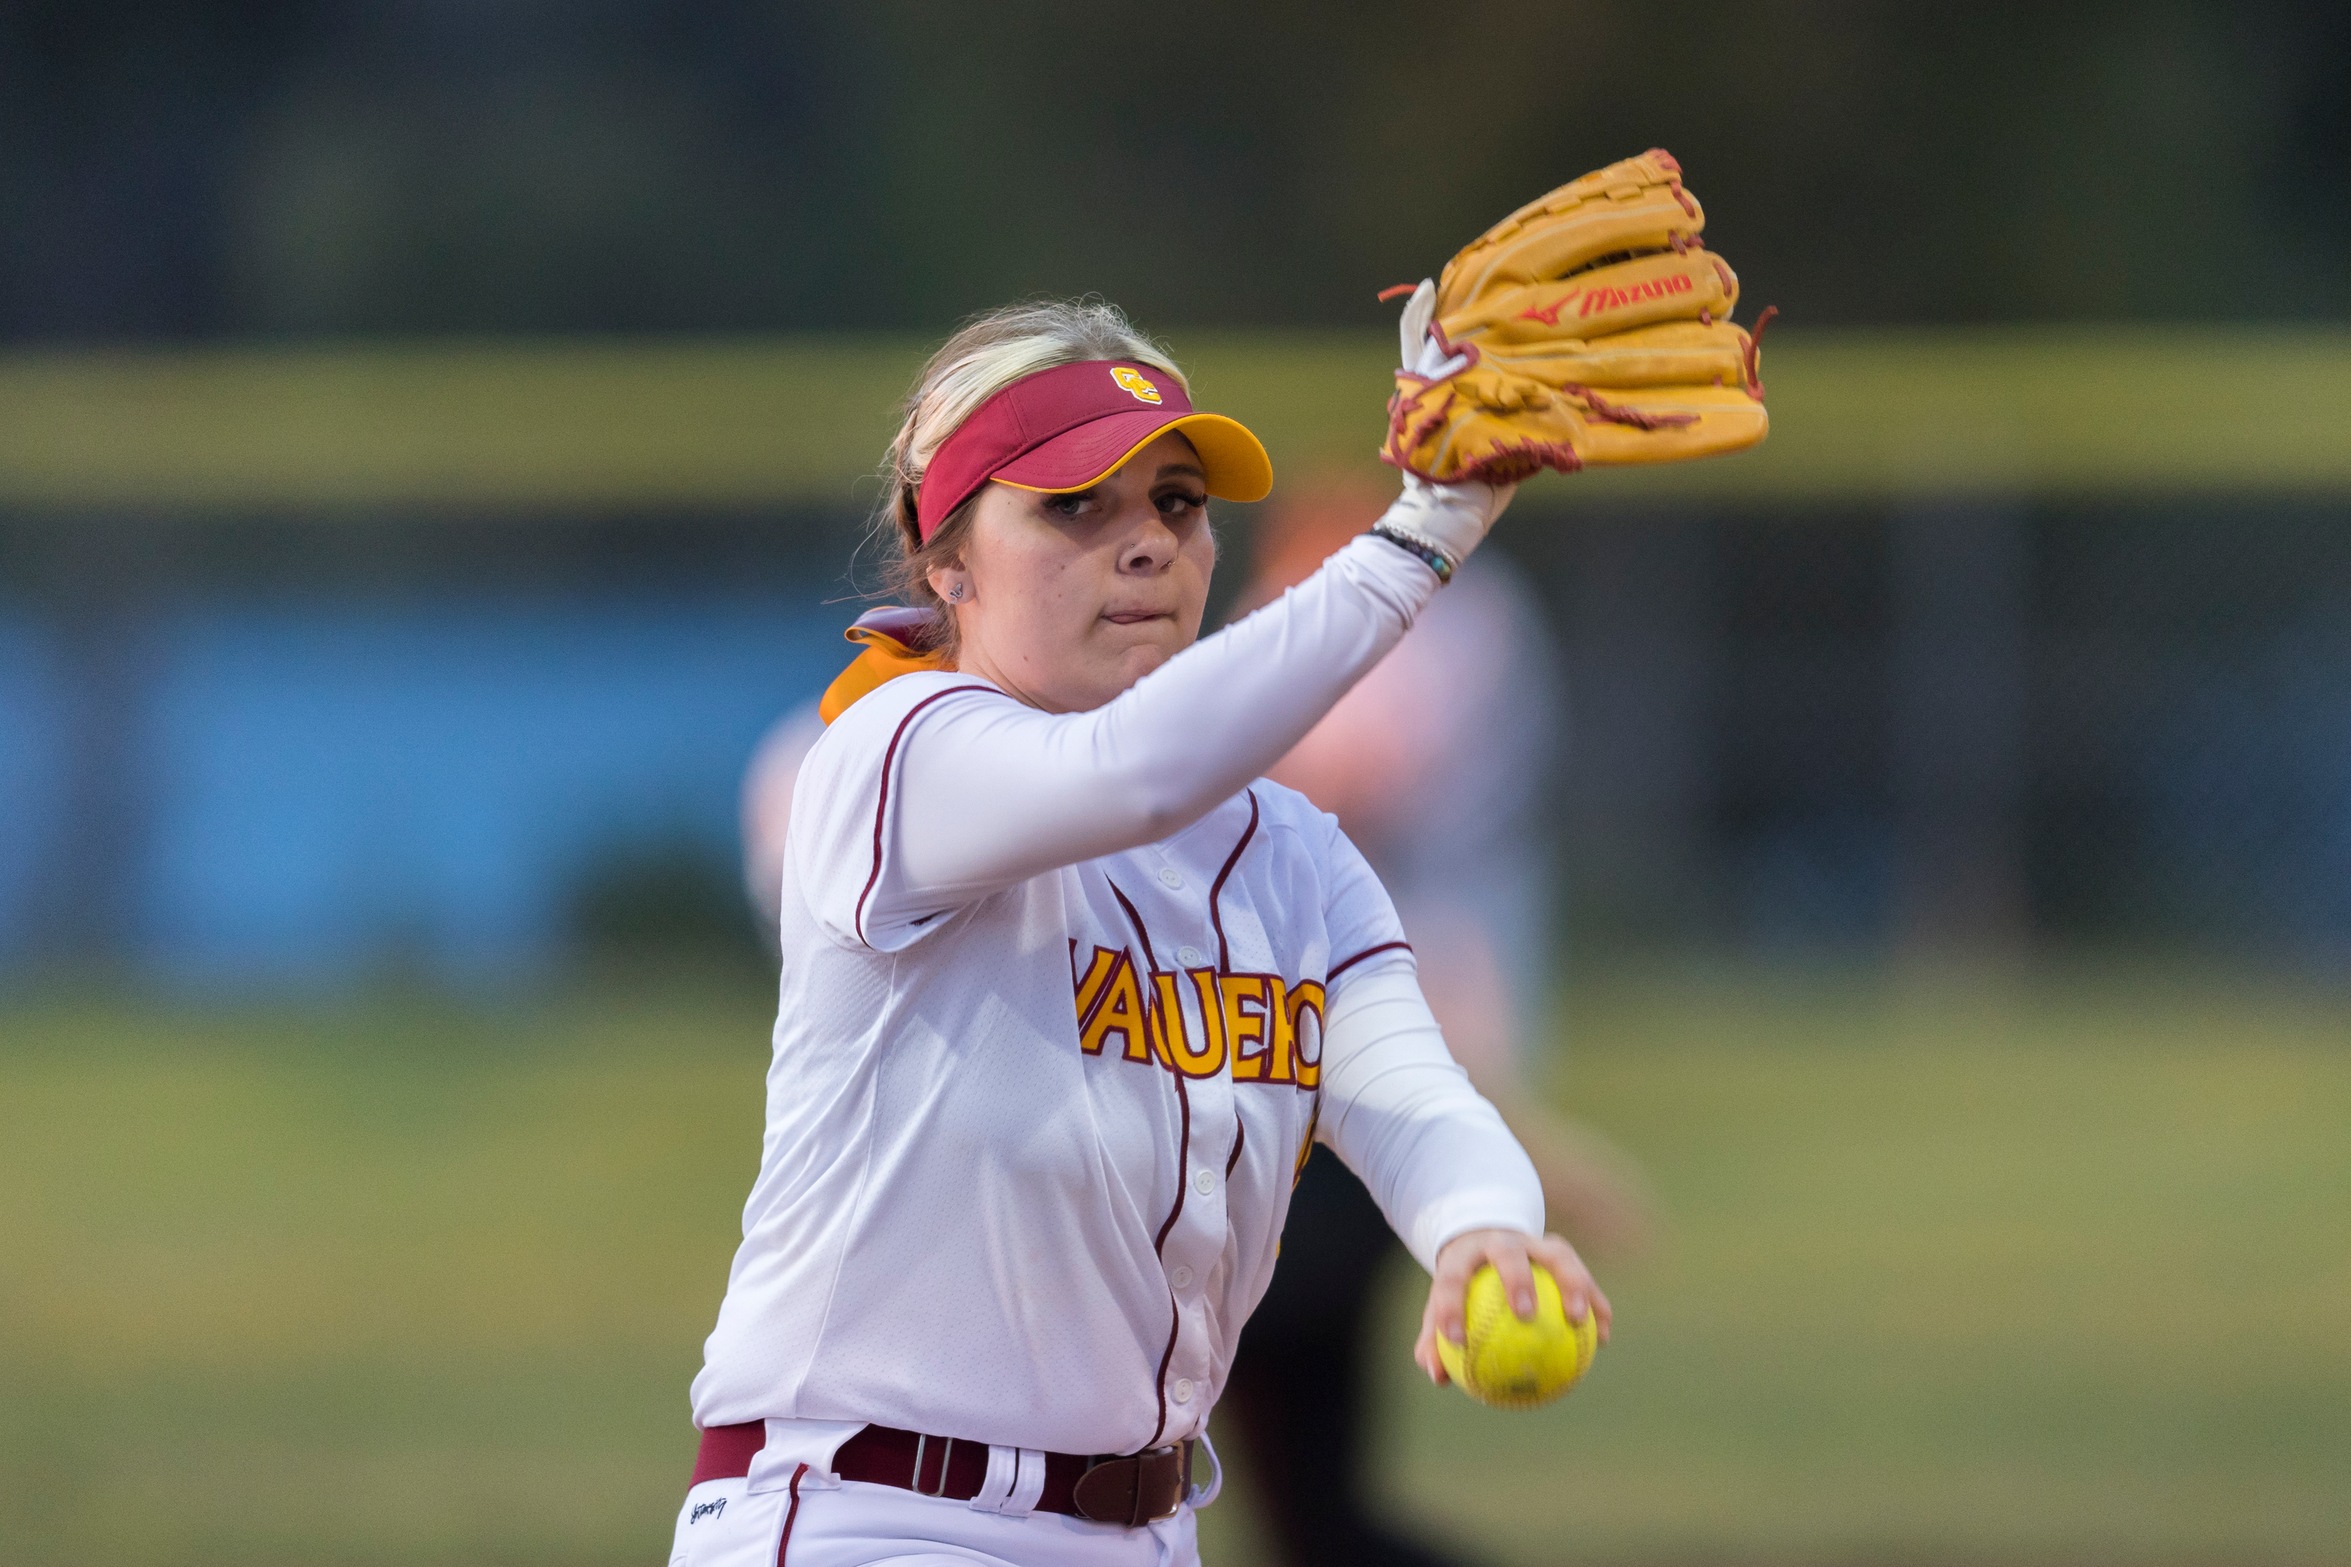 GCC Softball wins both games of doubleheader over Oxnard, 8-7 and 7-5; Torii Forsberg gets pitching wins in both games